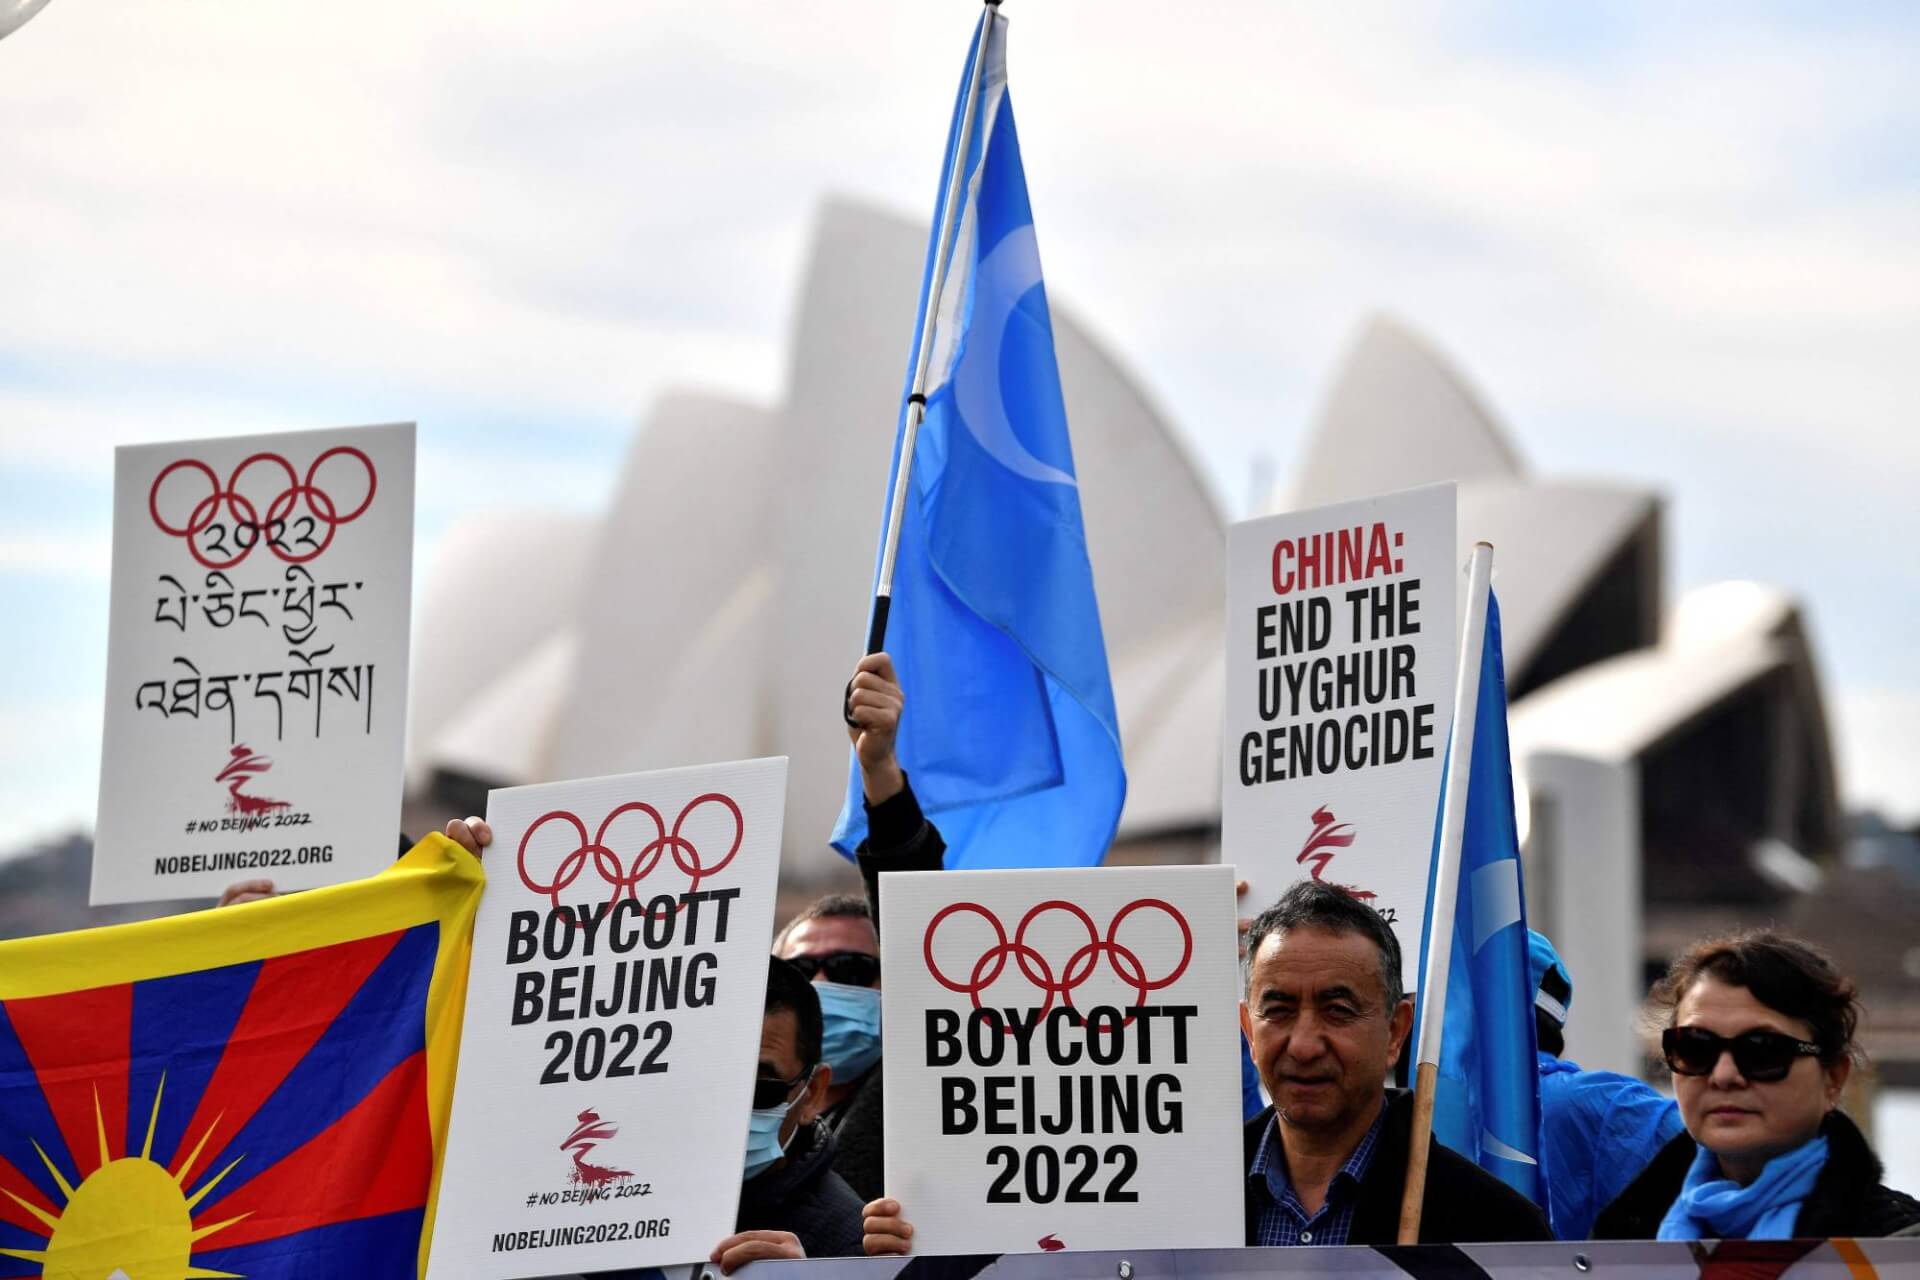 Australia Follows in US’ Footsteps, Boycotts Beijing Winter Olympics Over China’s Abuses